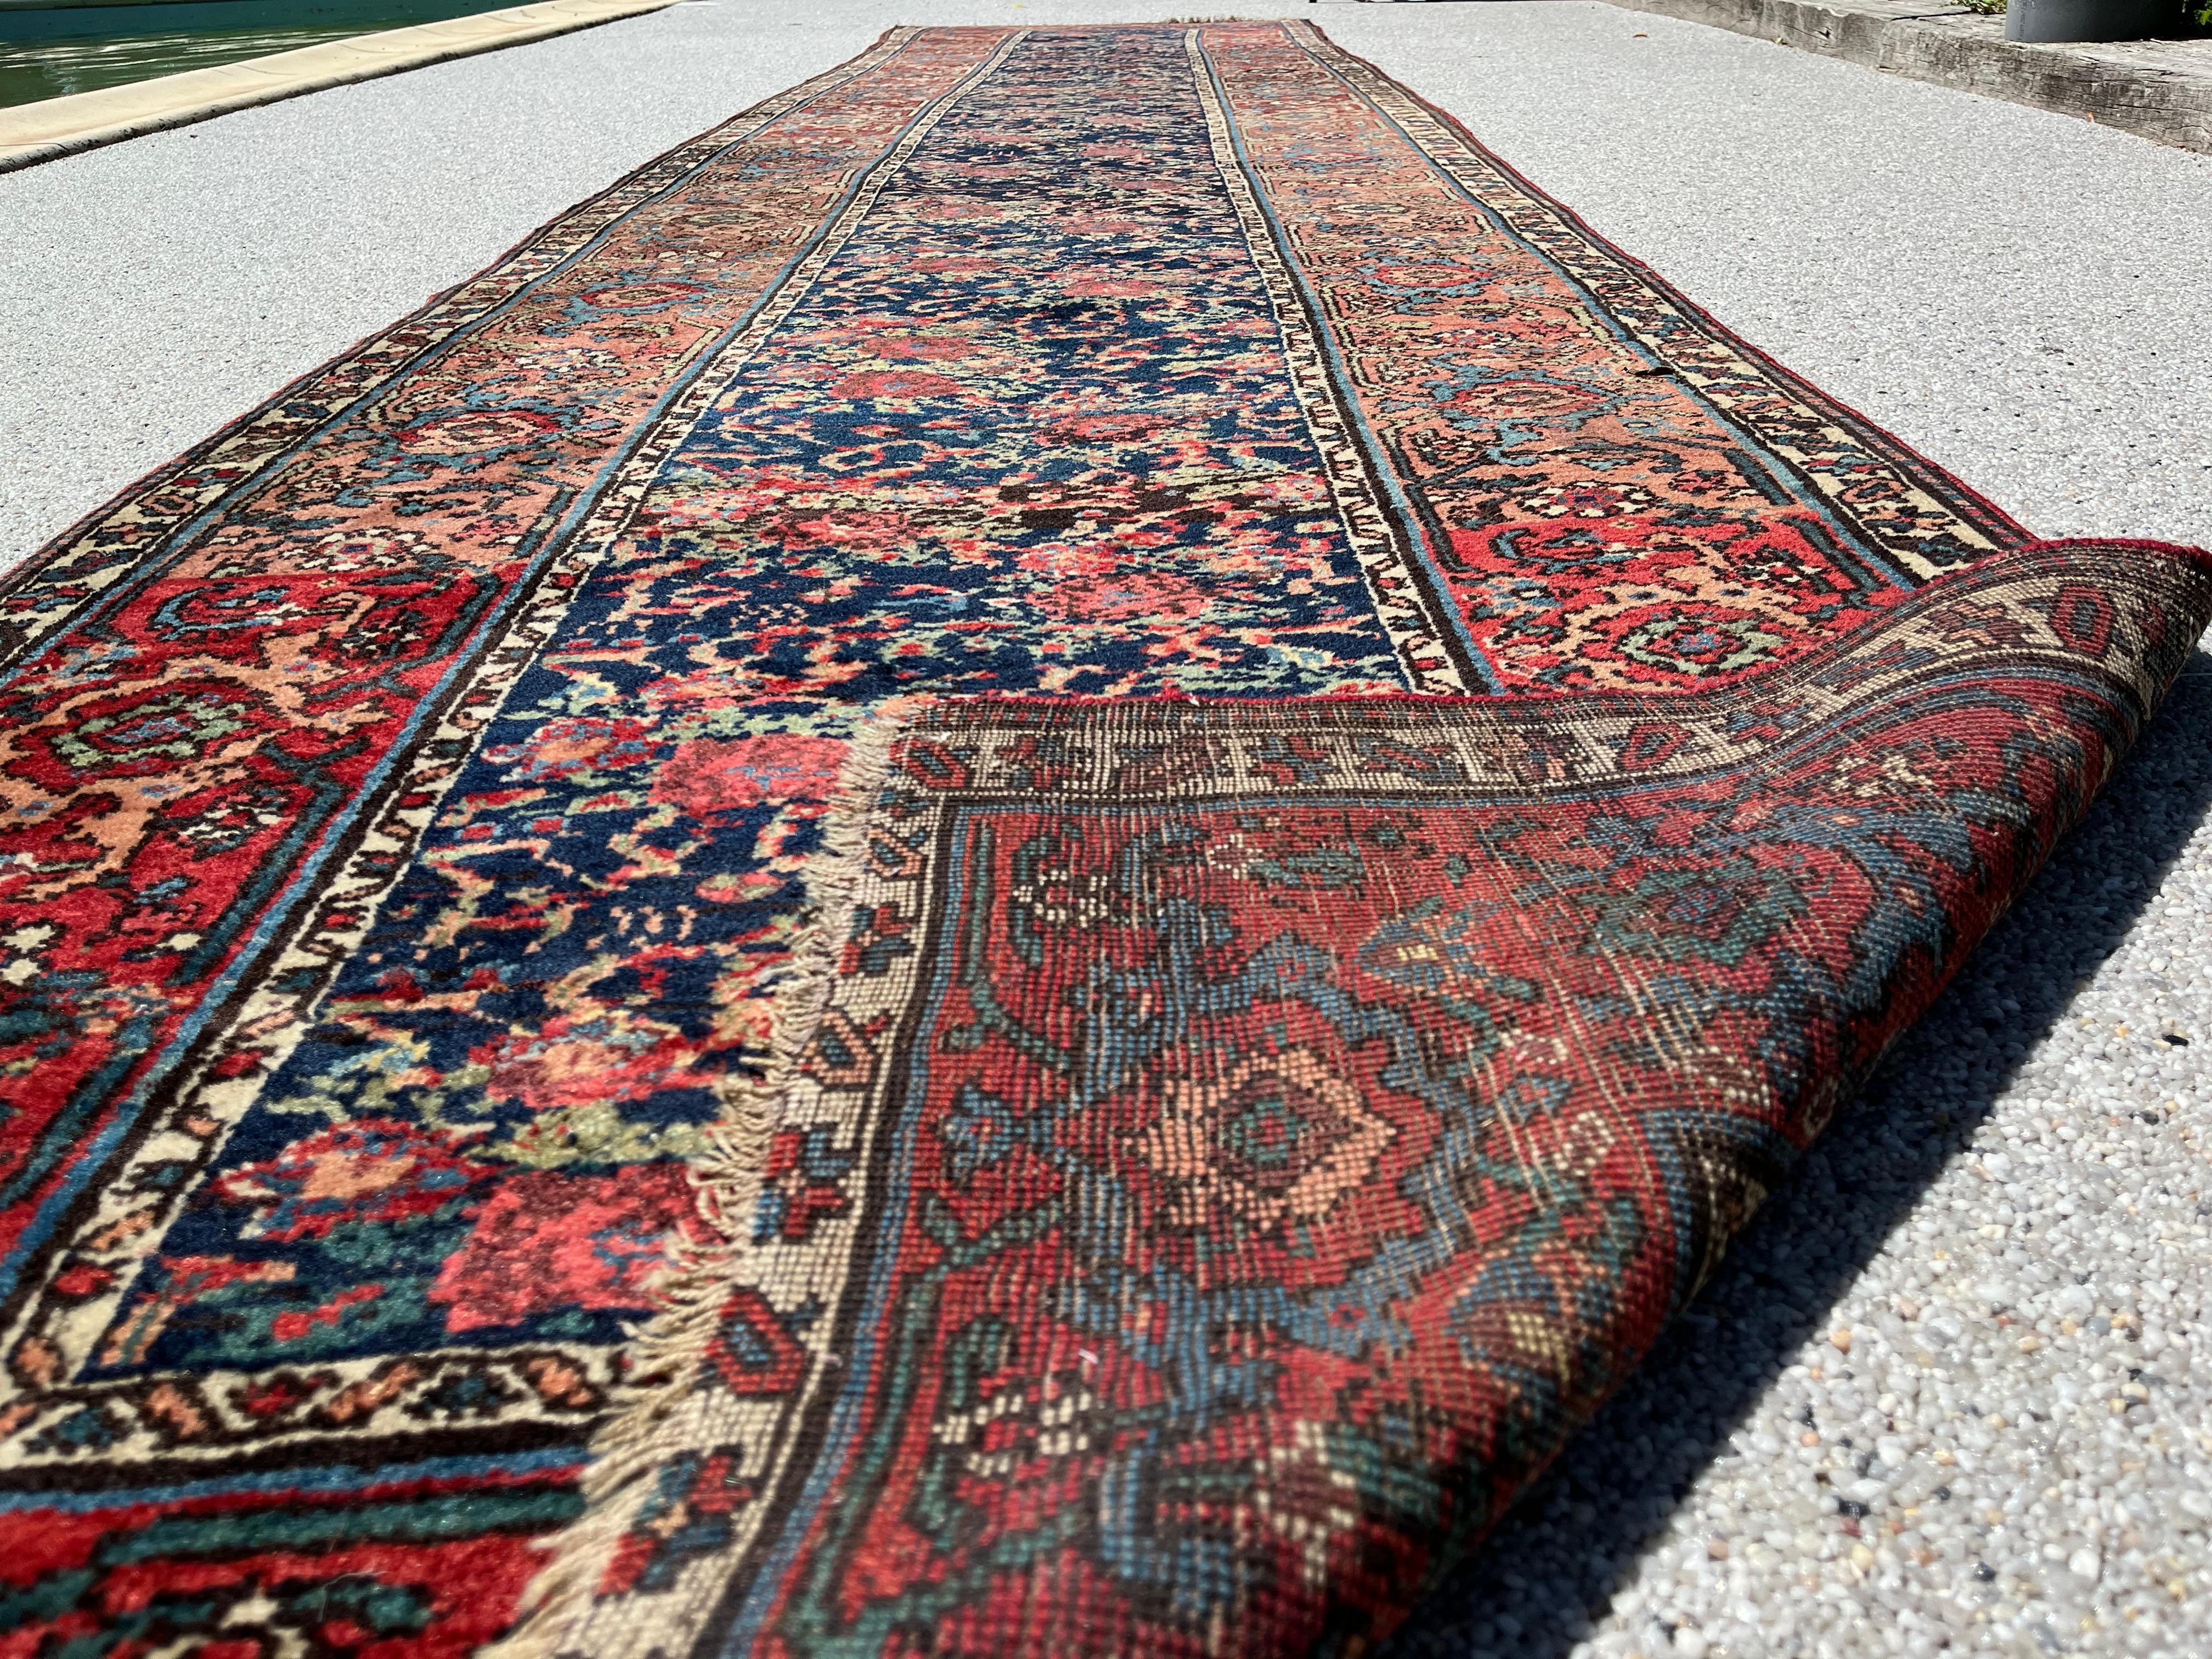 Antique Persian Bidjar Halvai runner, Circa 1900.

A highly original stylized border design is an exceptionally artful feature of this exquisitely crafted antique Bidjar rug. We can observe its distinctive patterns said Herati & Golfarang.
A